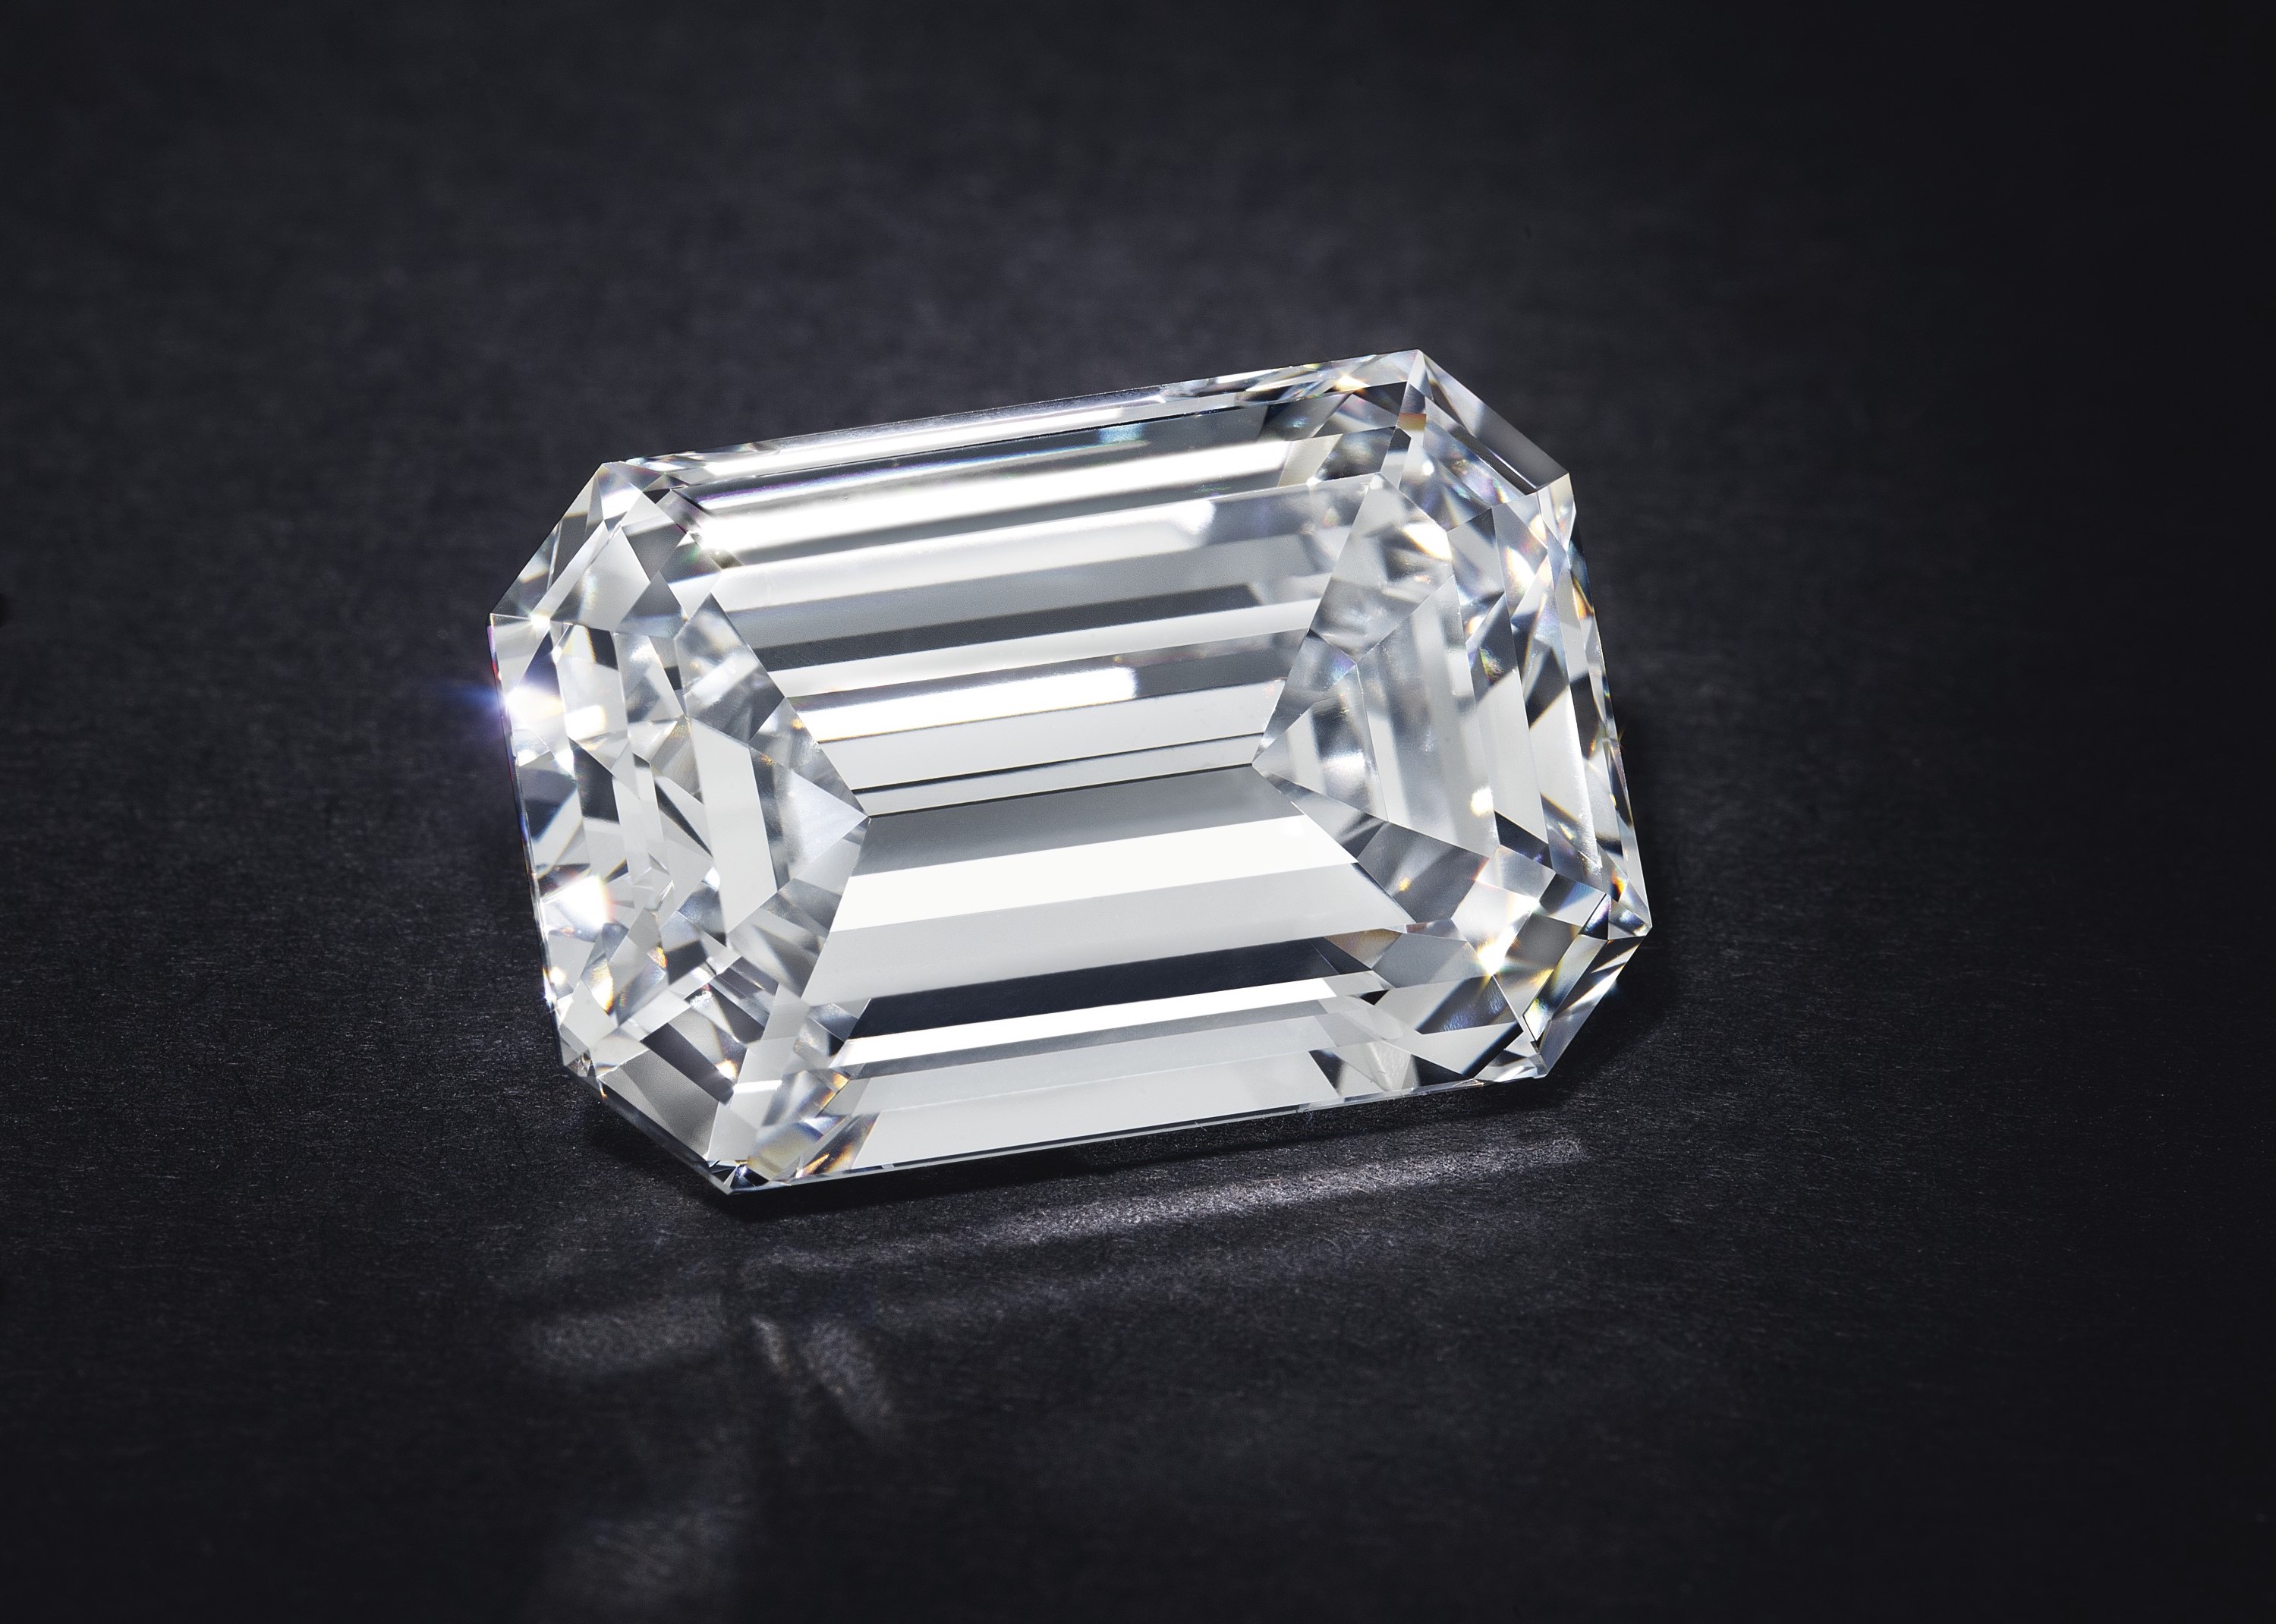 record price for a Jewel sold in an online auction